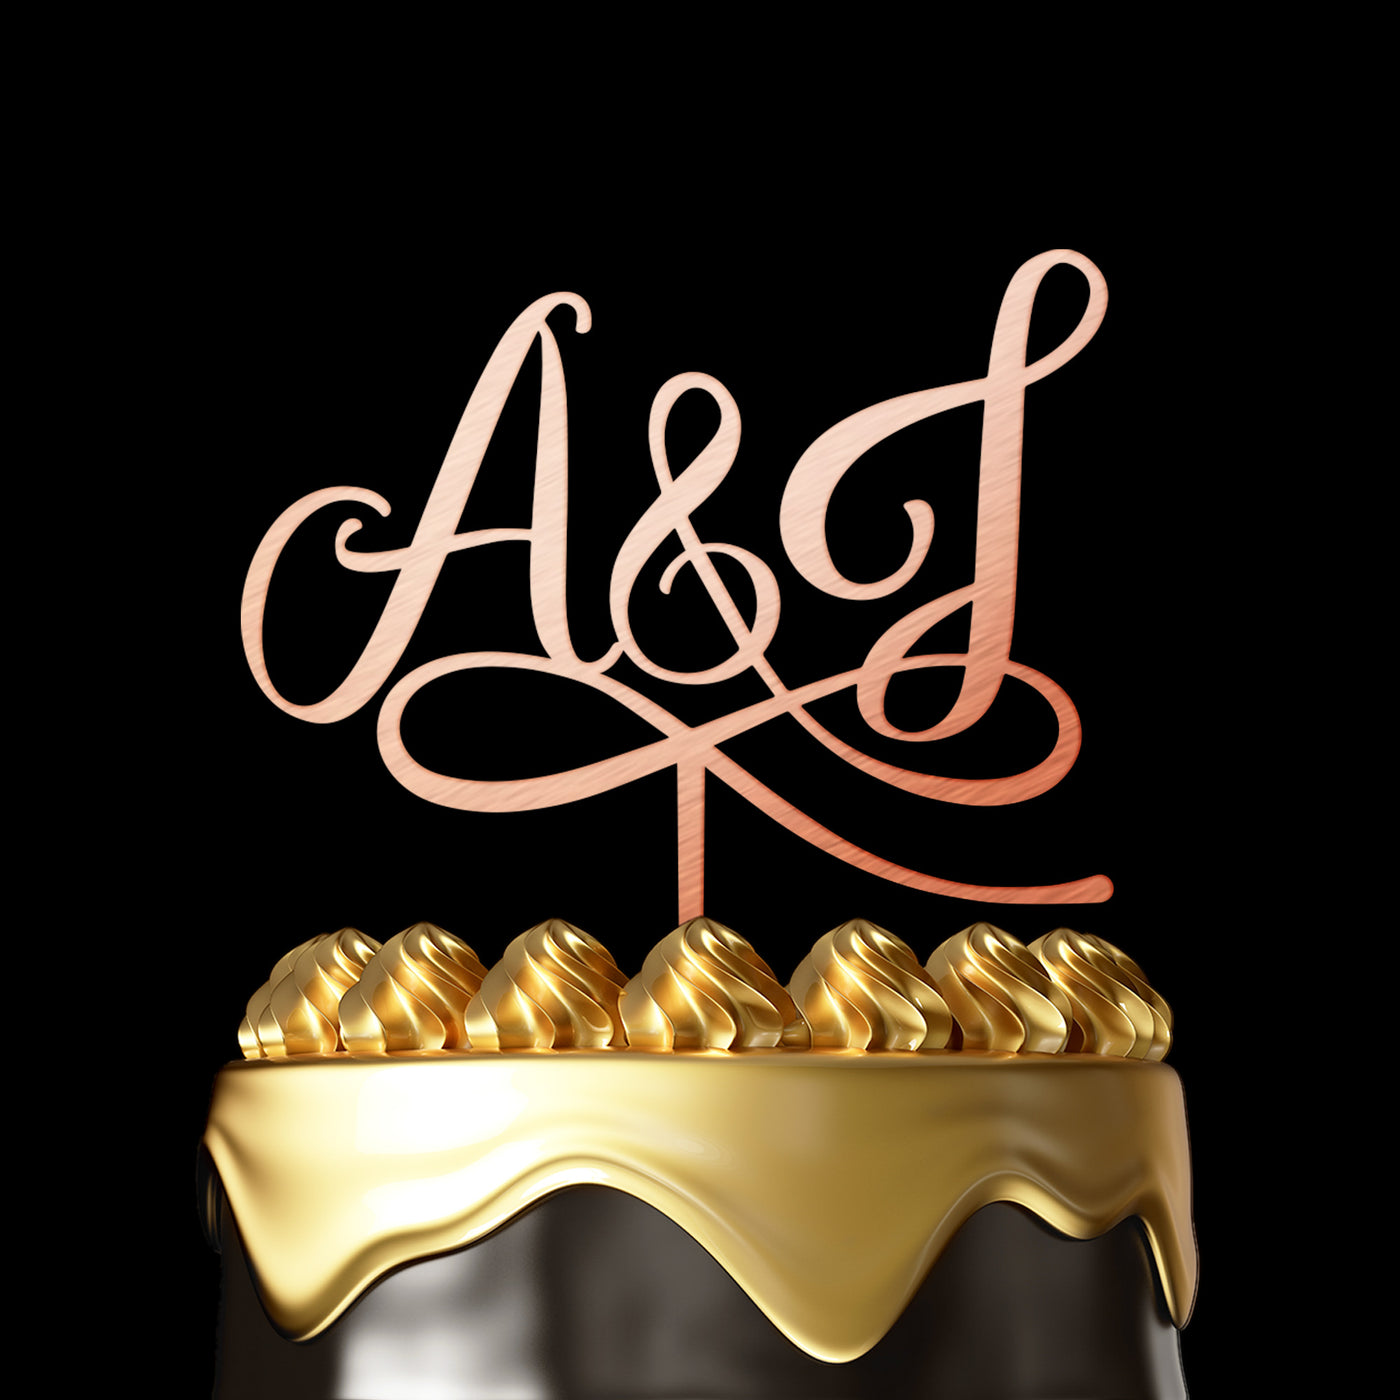 Personalized Cake Topper A&B - Wedding Cake Topper by Luxtomi